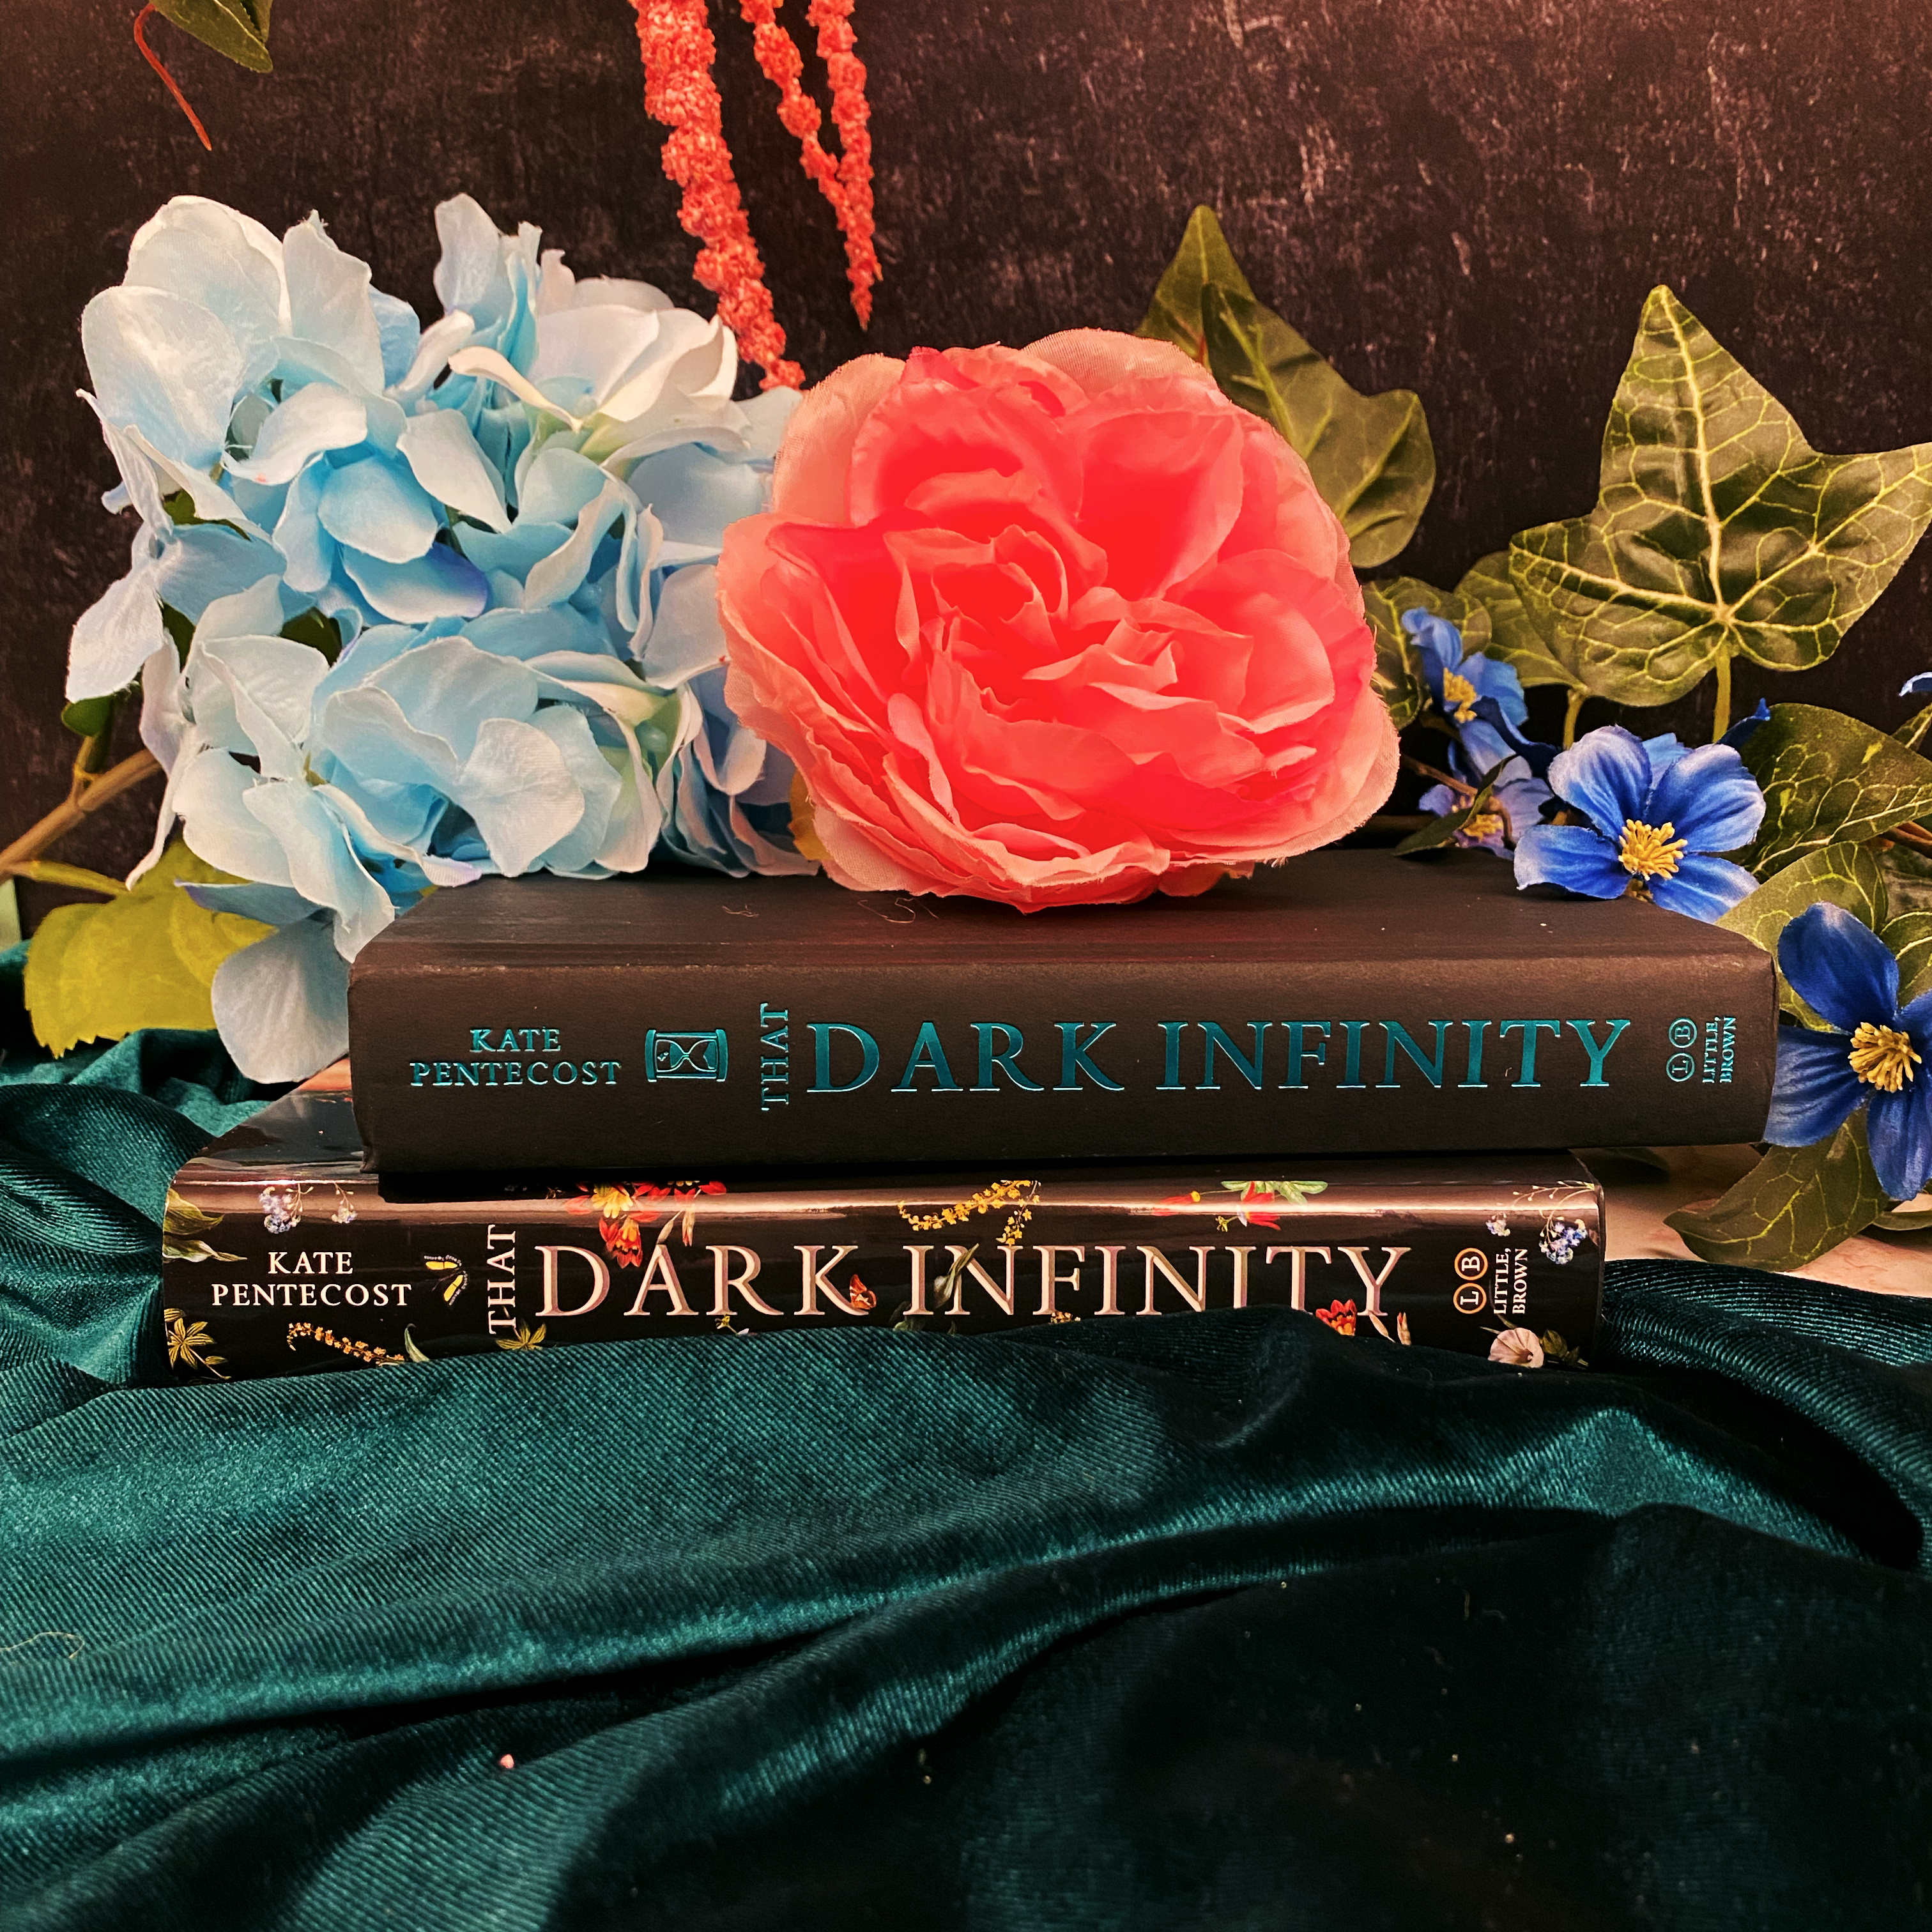 Image of the book "That Dark Infinity" by Kate Pentecost